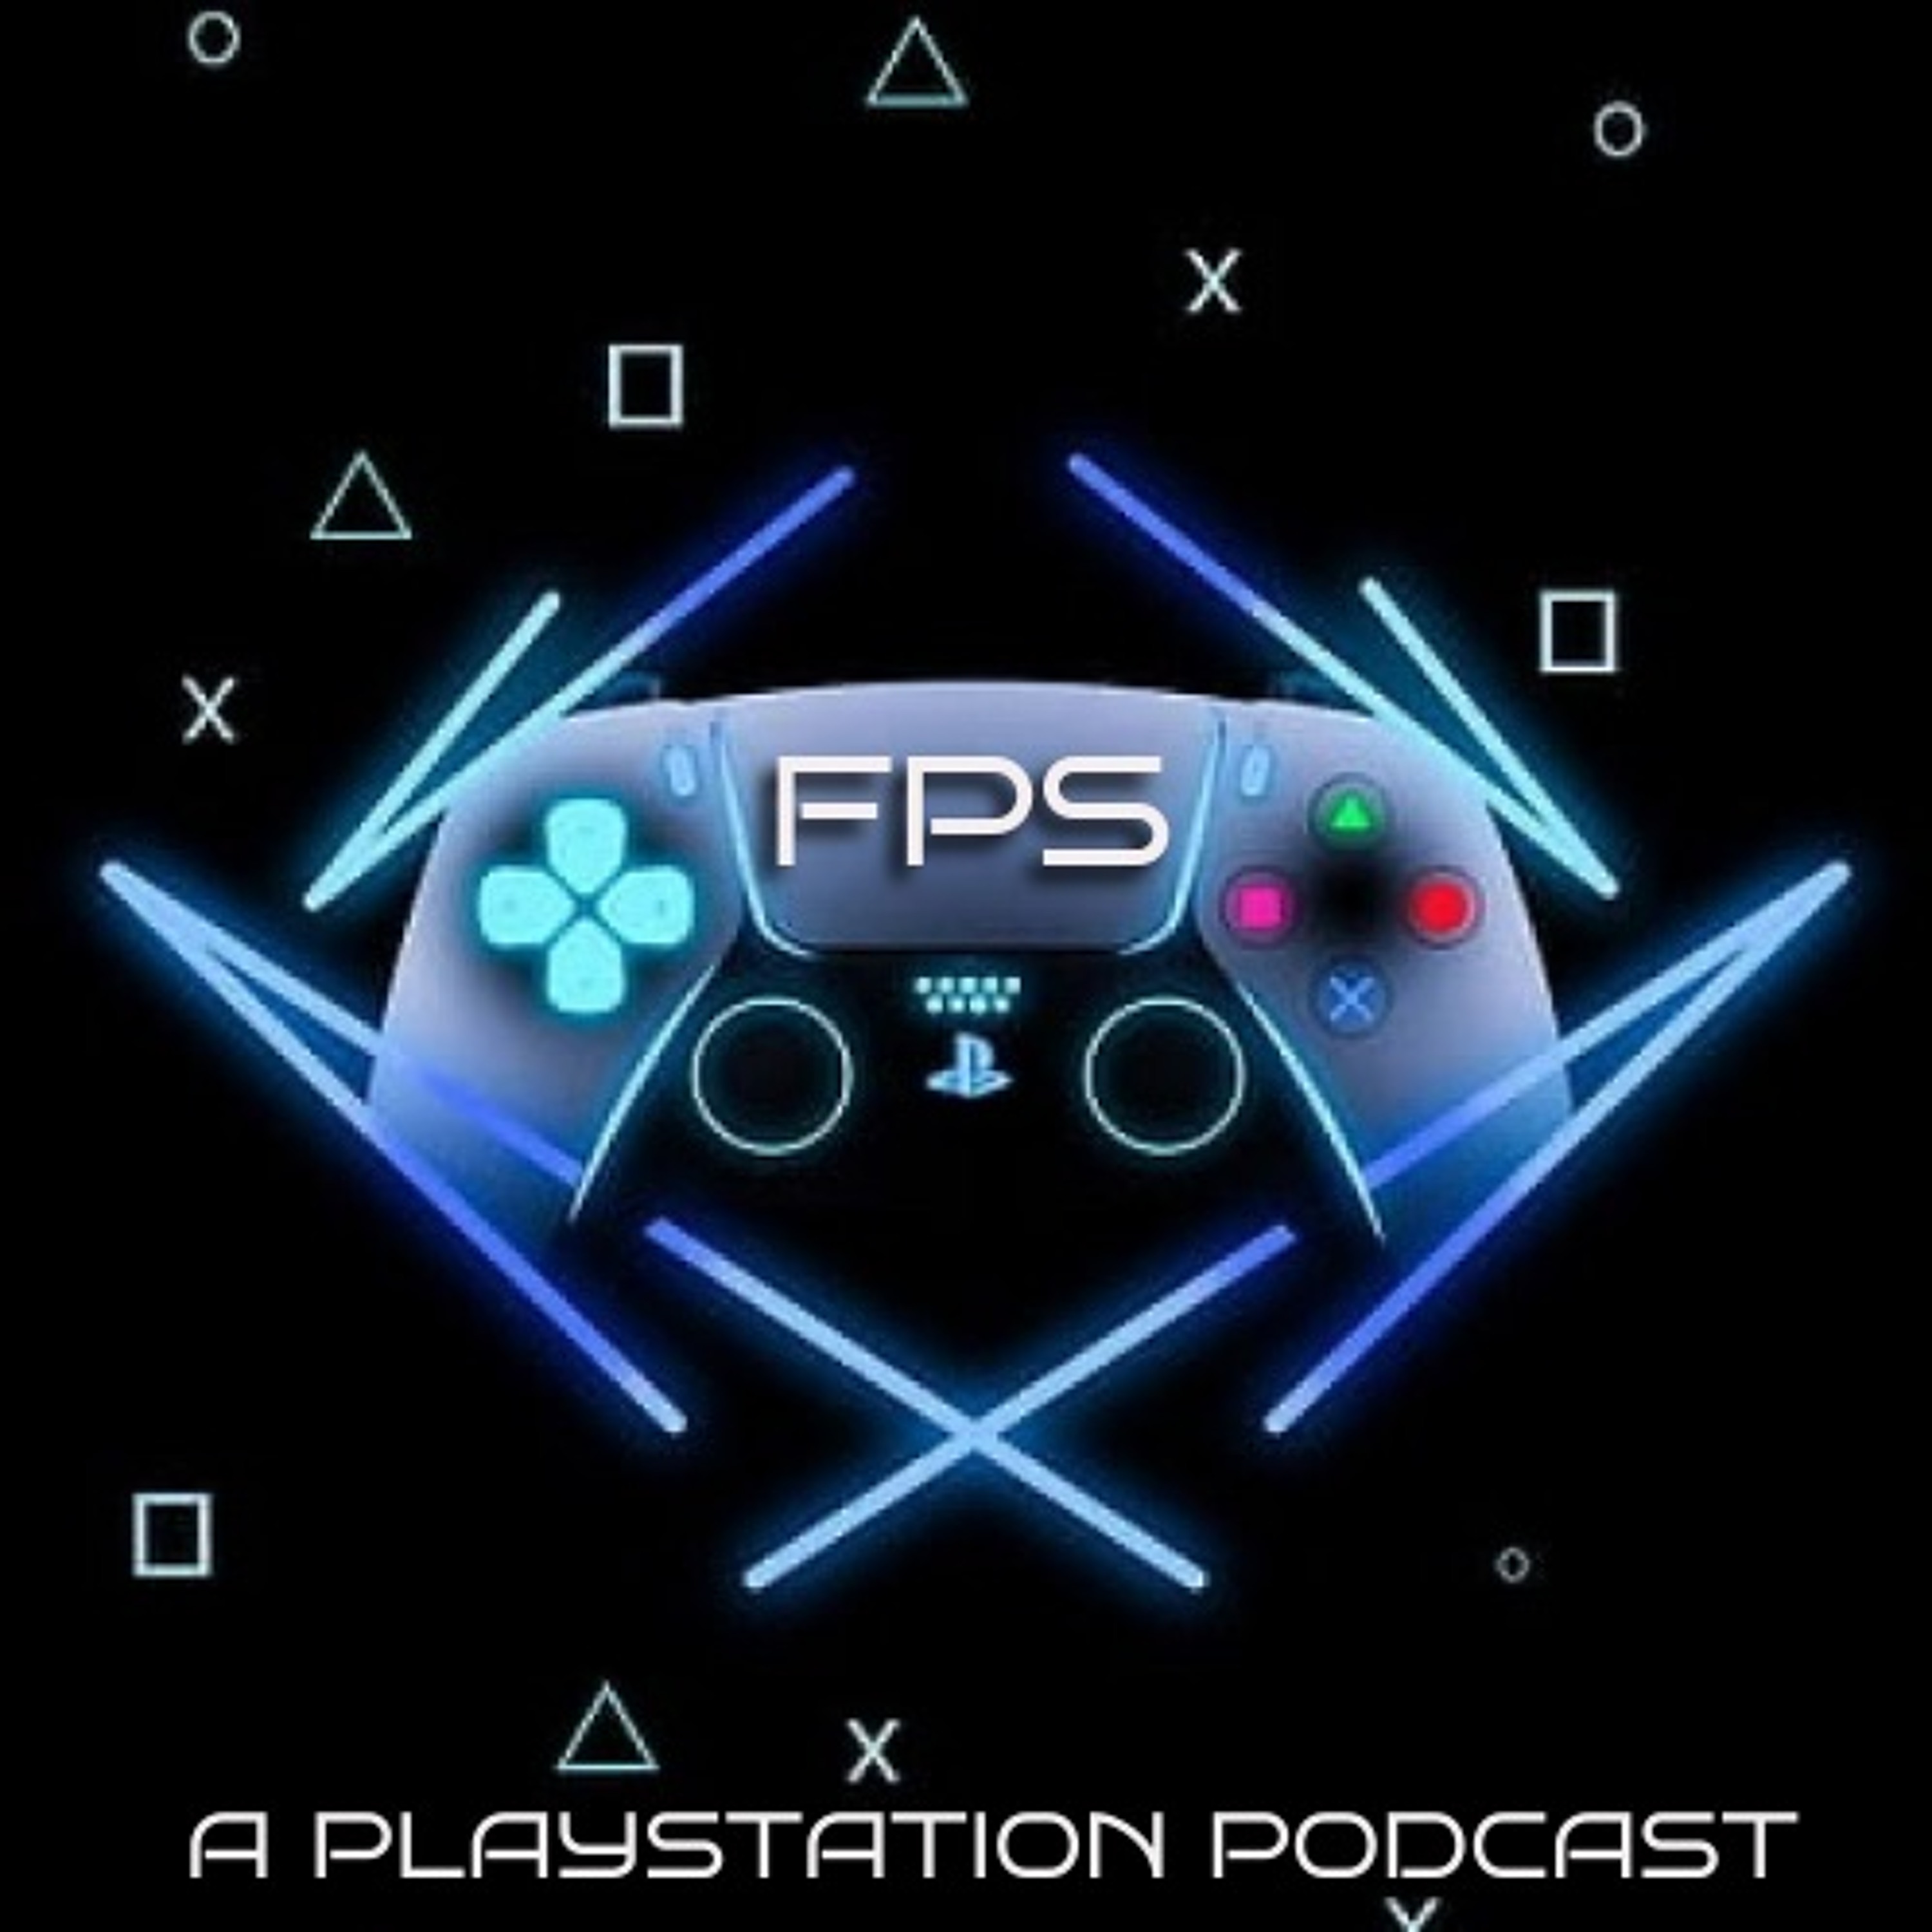 A Father's PlayStation Ep: 179 - A State of Espionage